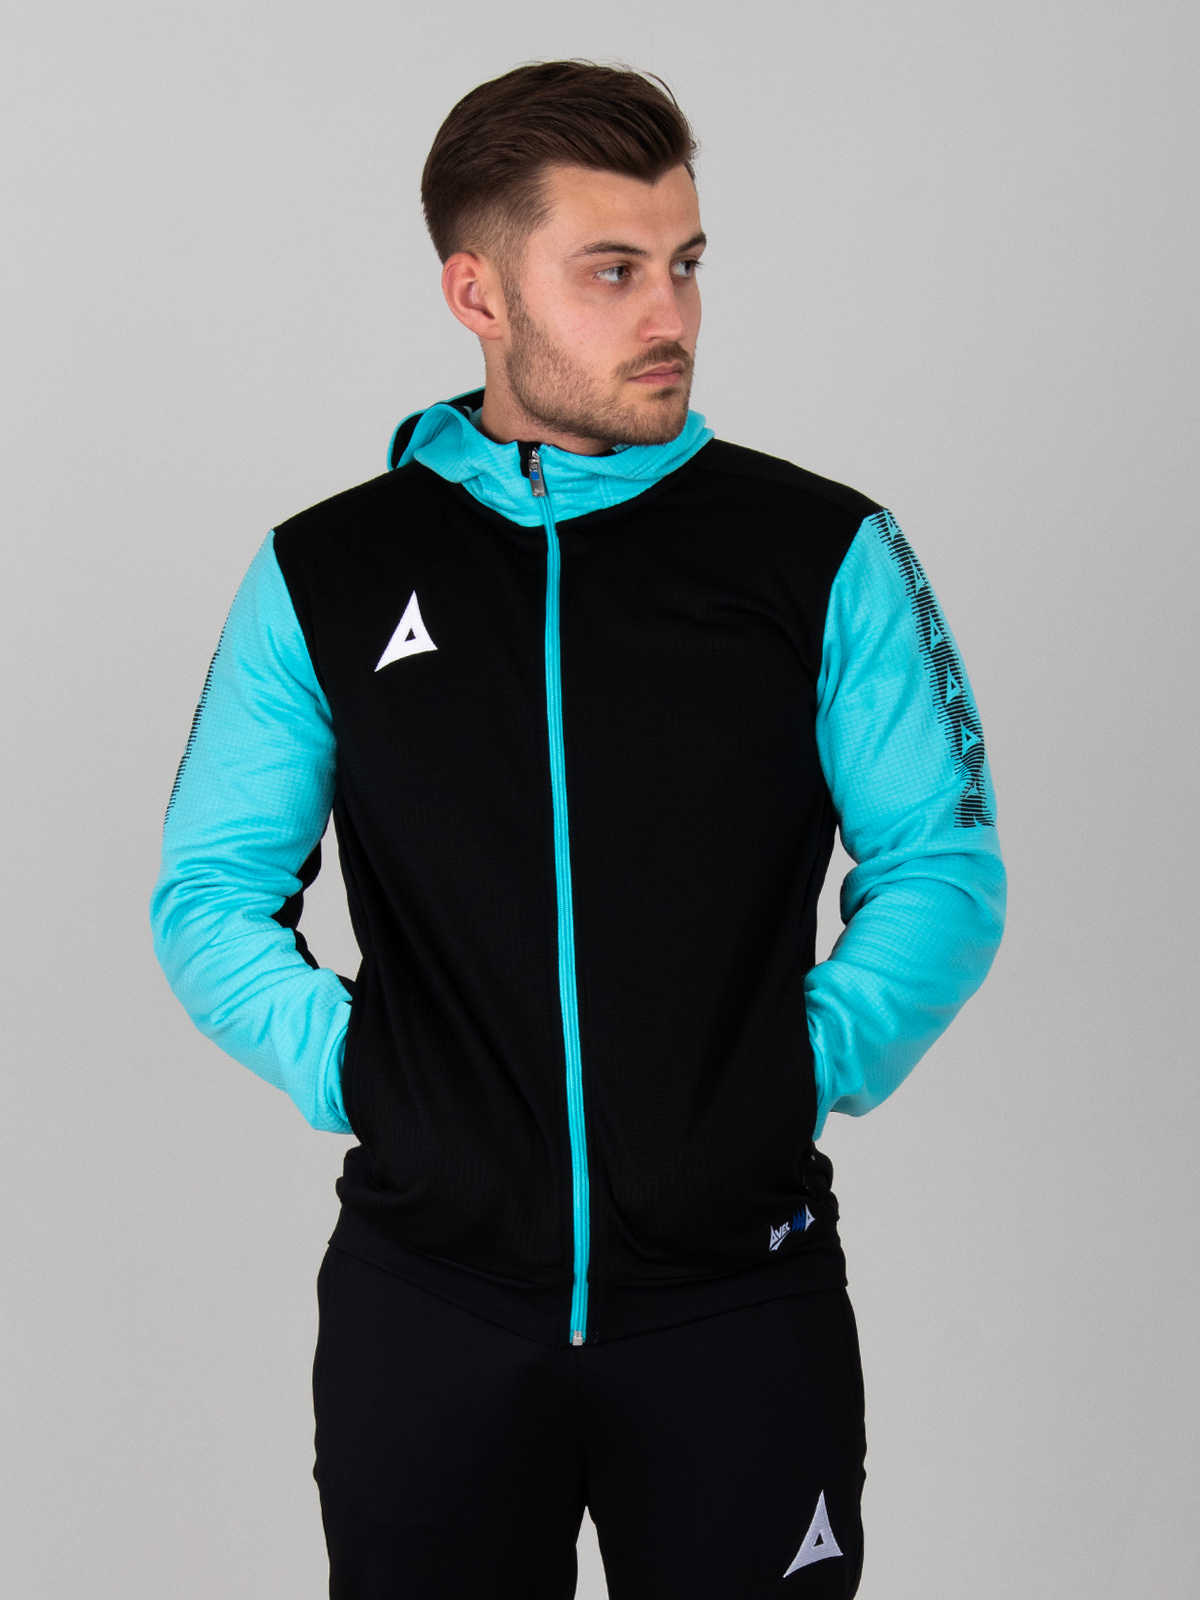 a man is wearing a black hoodie with a full zip. the item has pale blue sleeves and zip